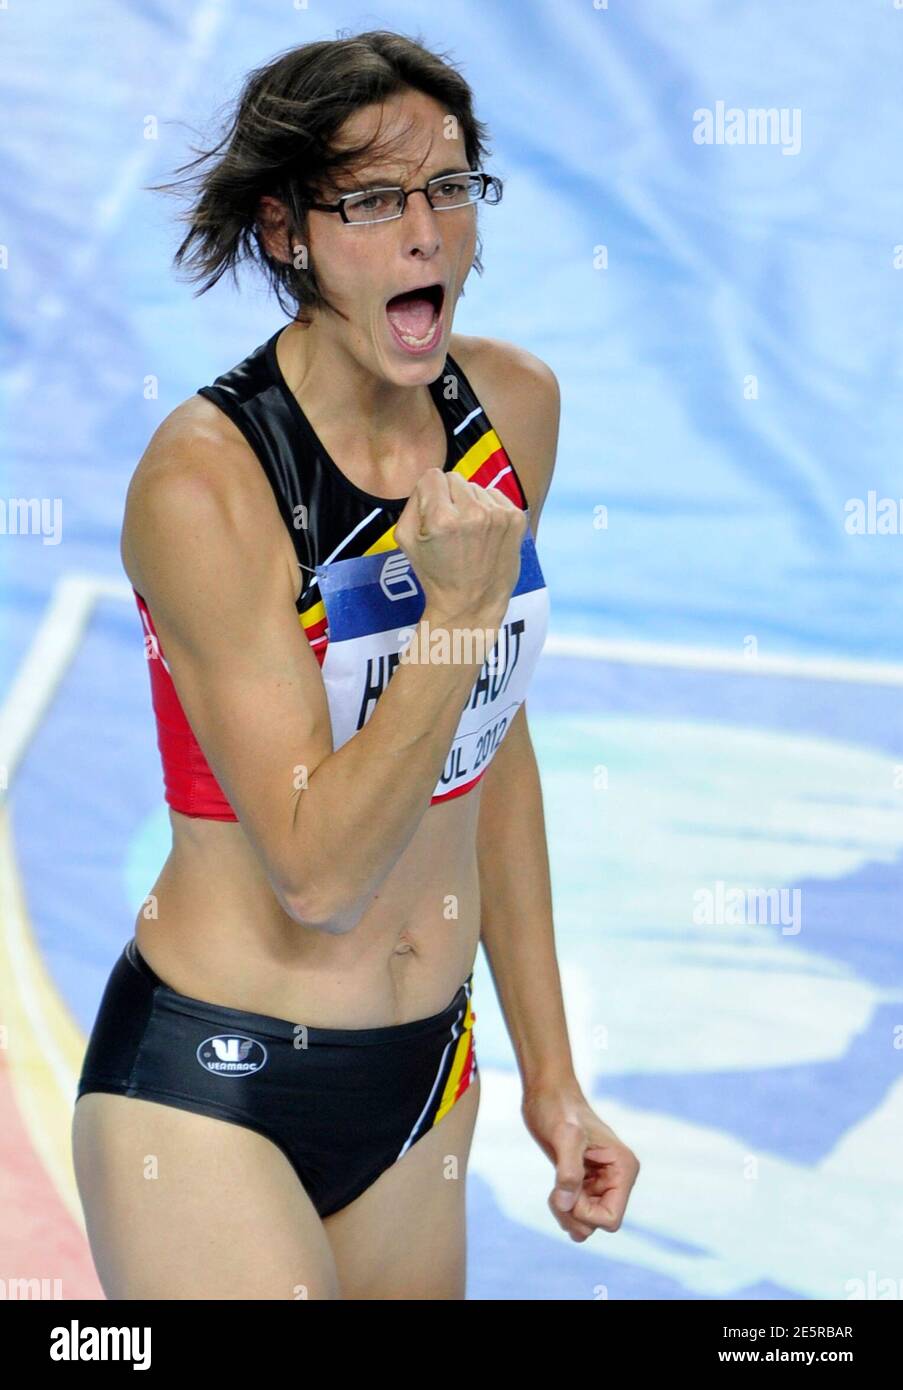 Tia Hellebaut of Belgium reacts during the women's high jump final during  the world indoor athletics championships at the Atakoy Athletics Arena in  Istanbul March 10, 2012. REUTERS/Dylan Martinez (TURKEY - Tags: